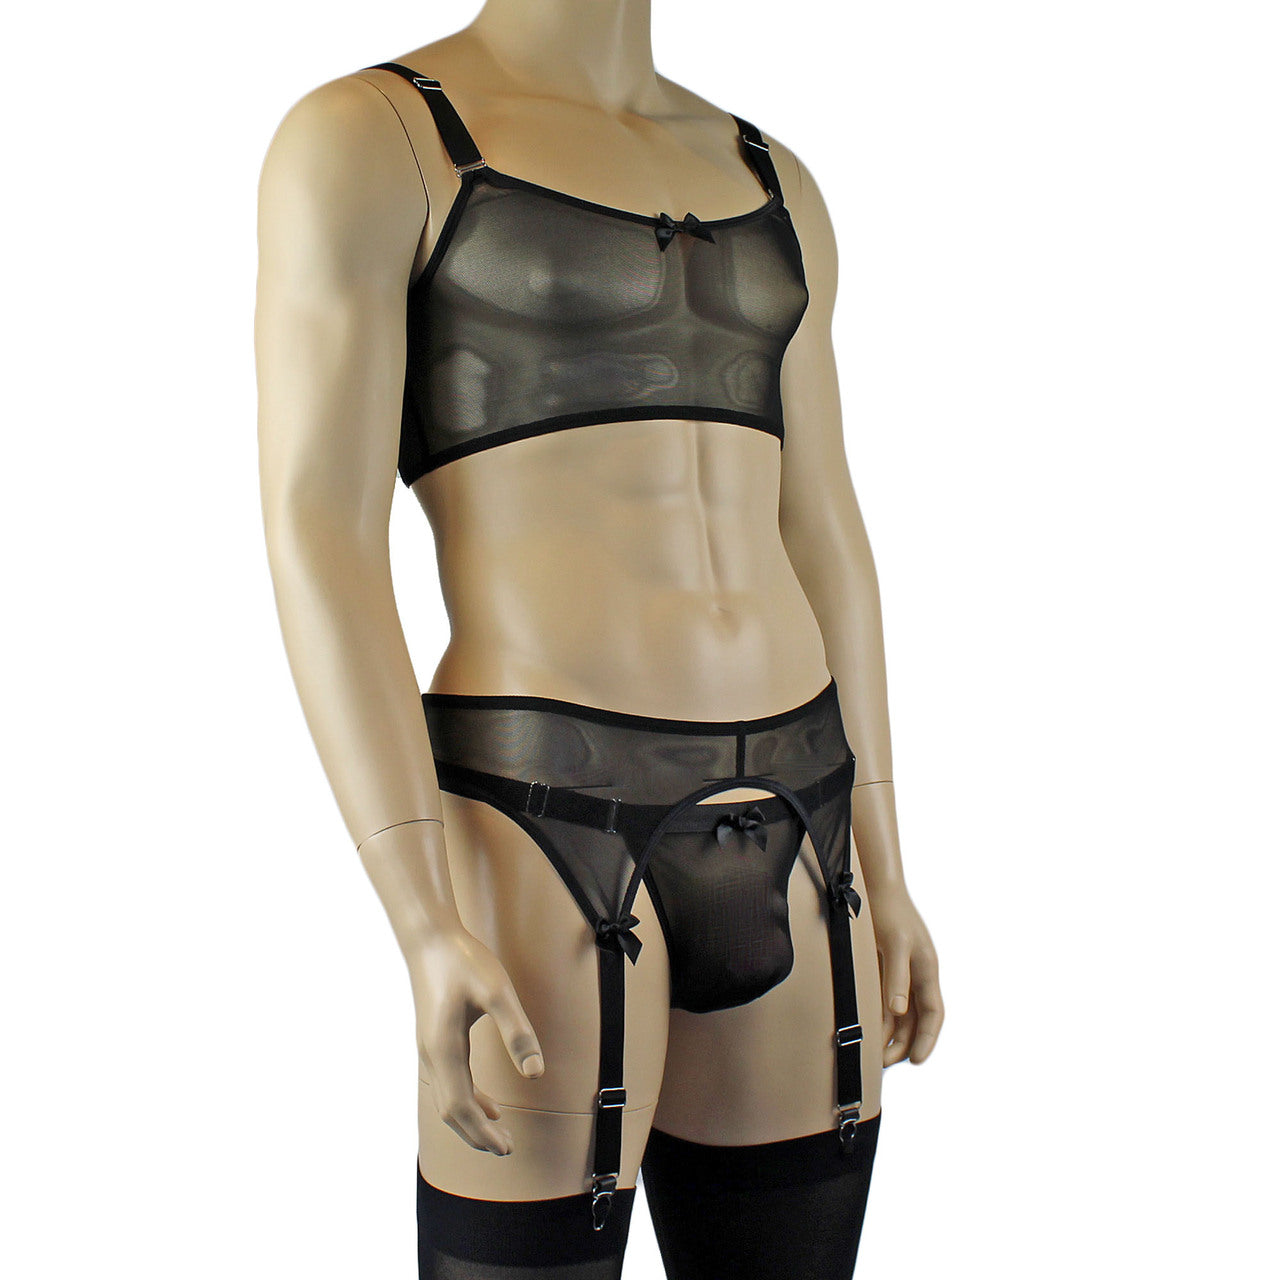 Mens Exotic Sheer Mesh Crop Bra Top Camisole, G string & Garterbelt - Sizes up to 3XL (black plus other colours)